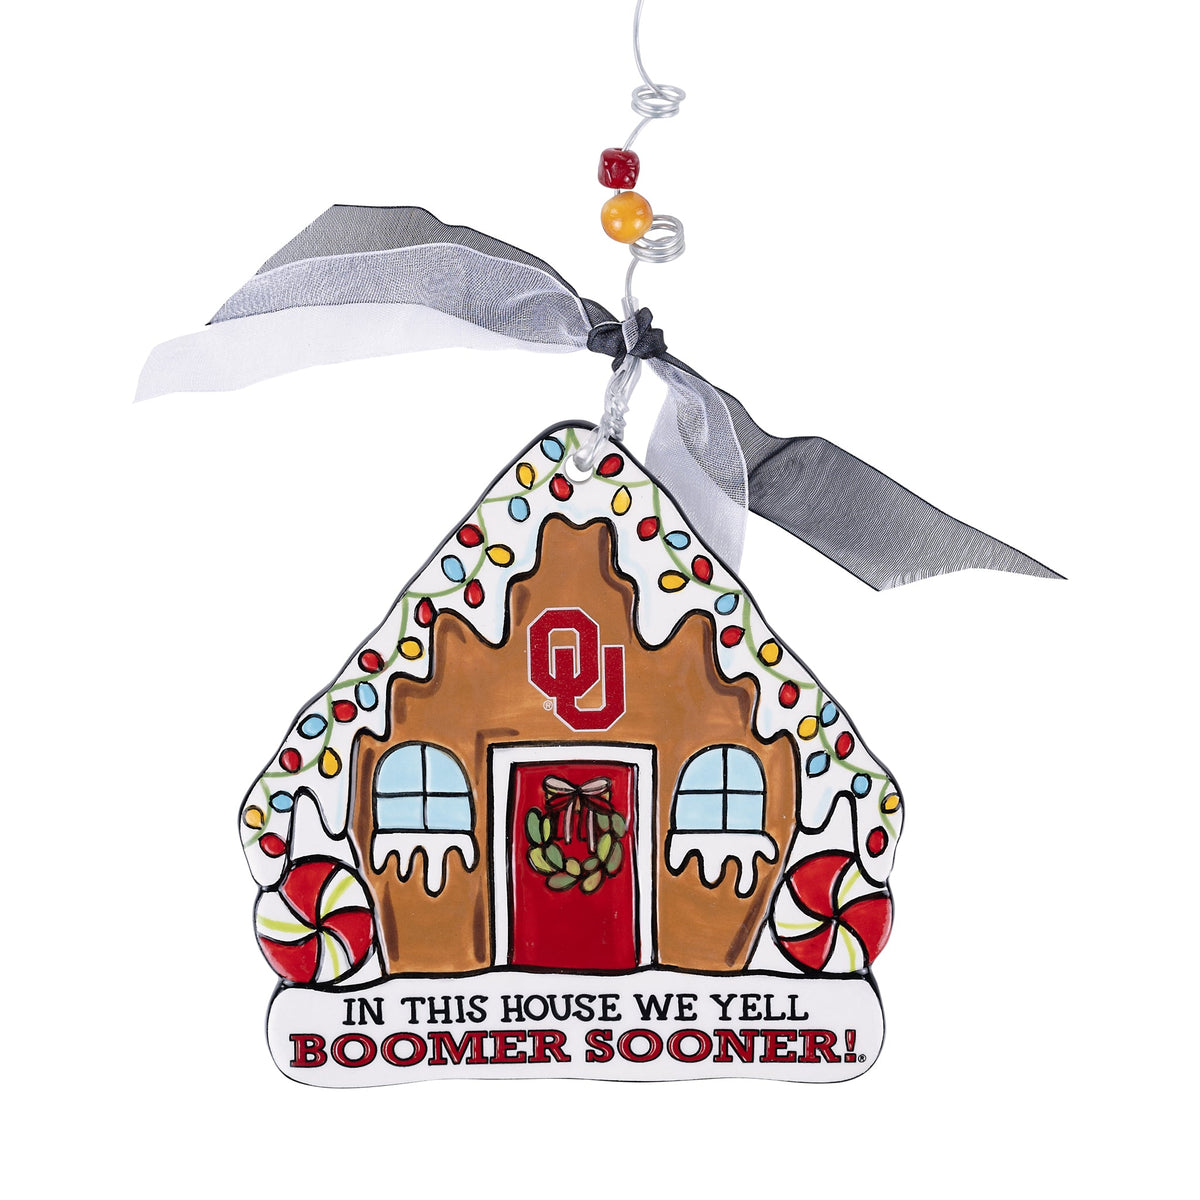 In this House We Yell Boomer Sooner